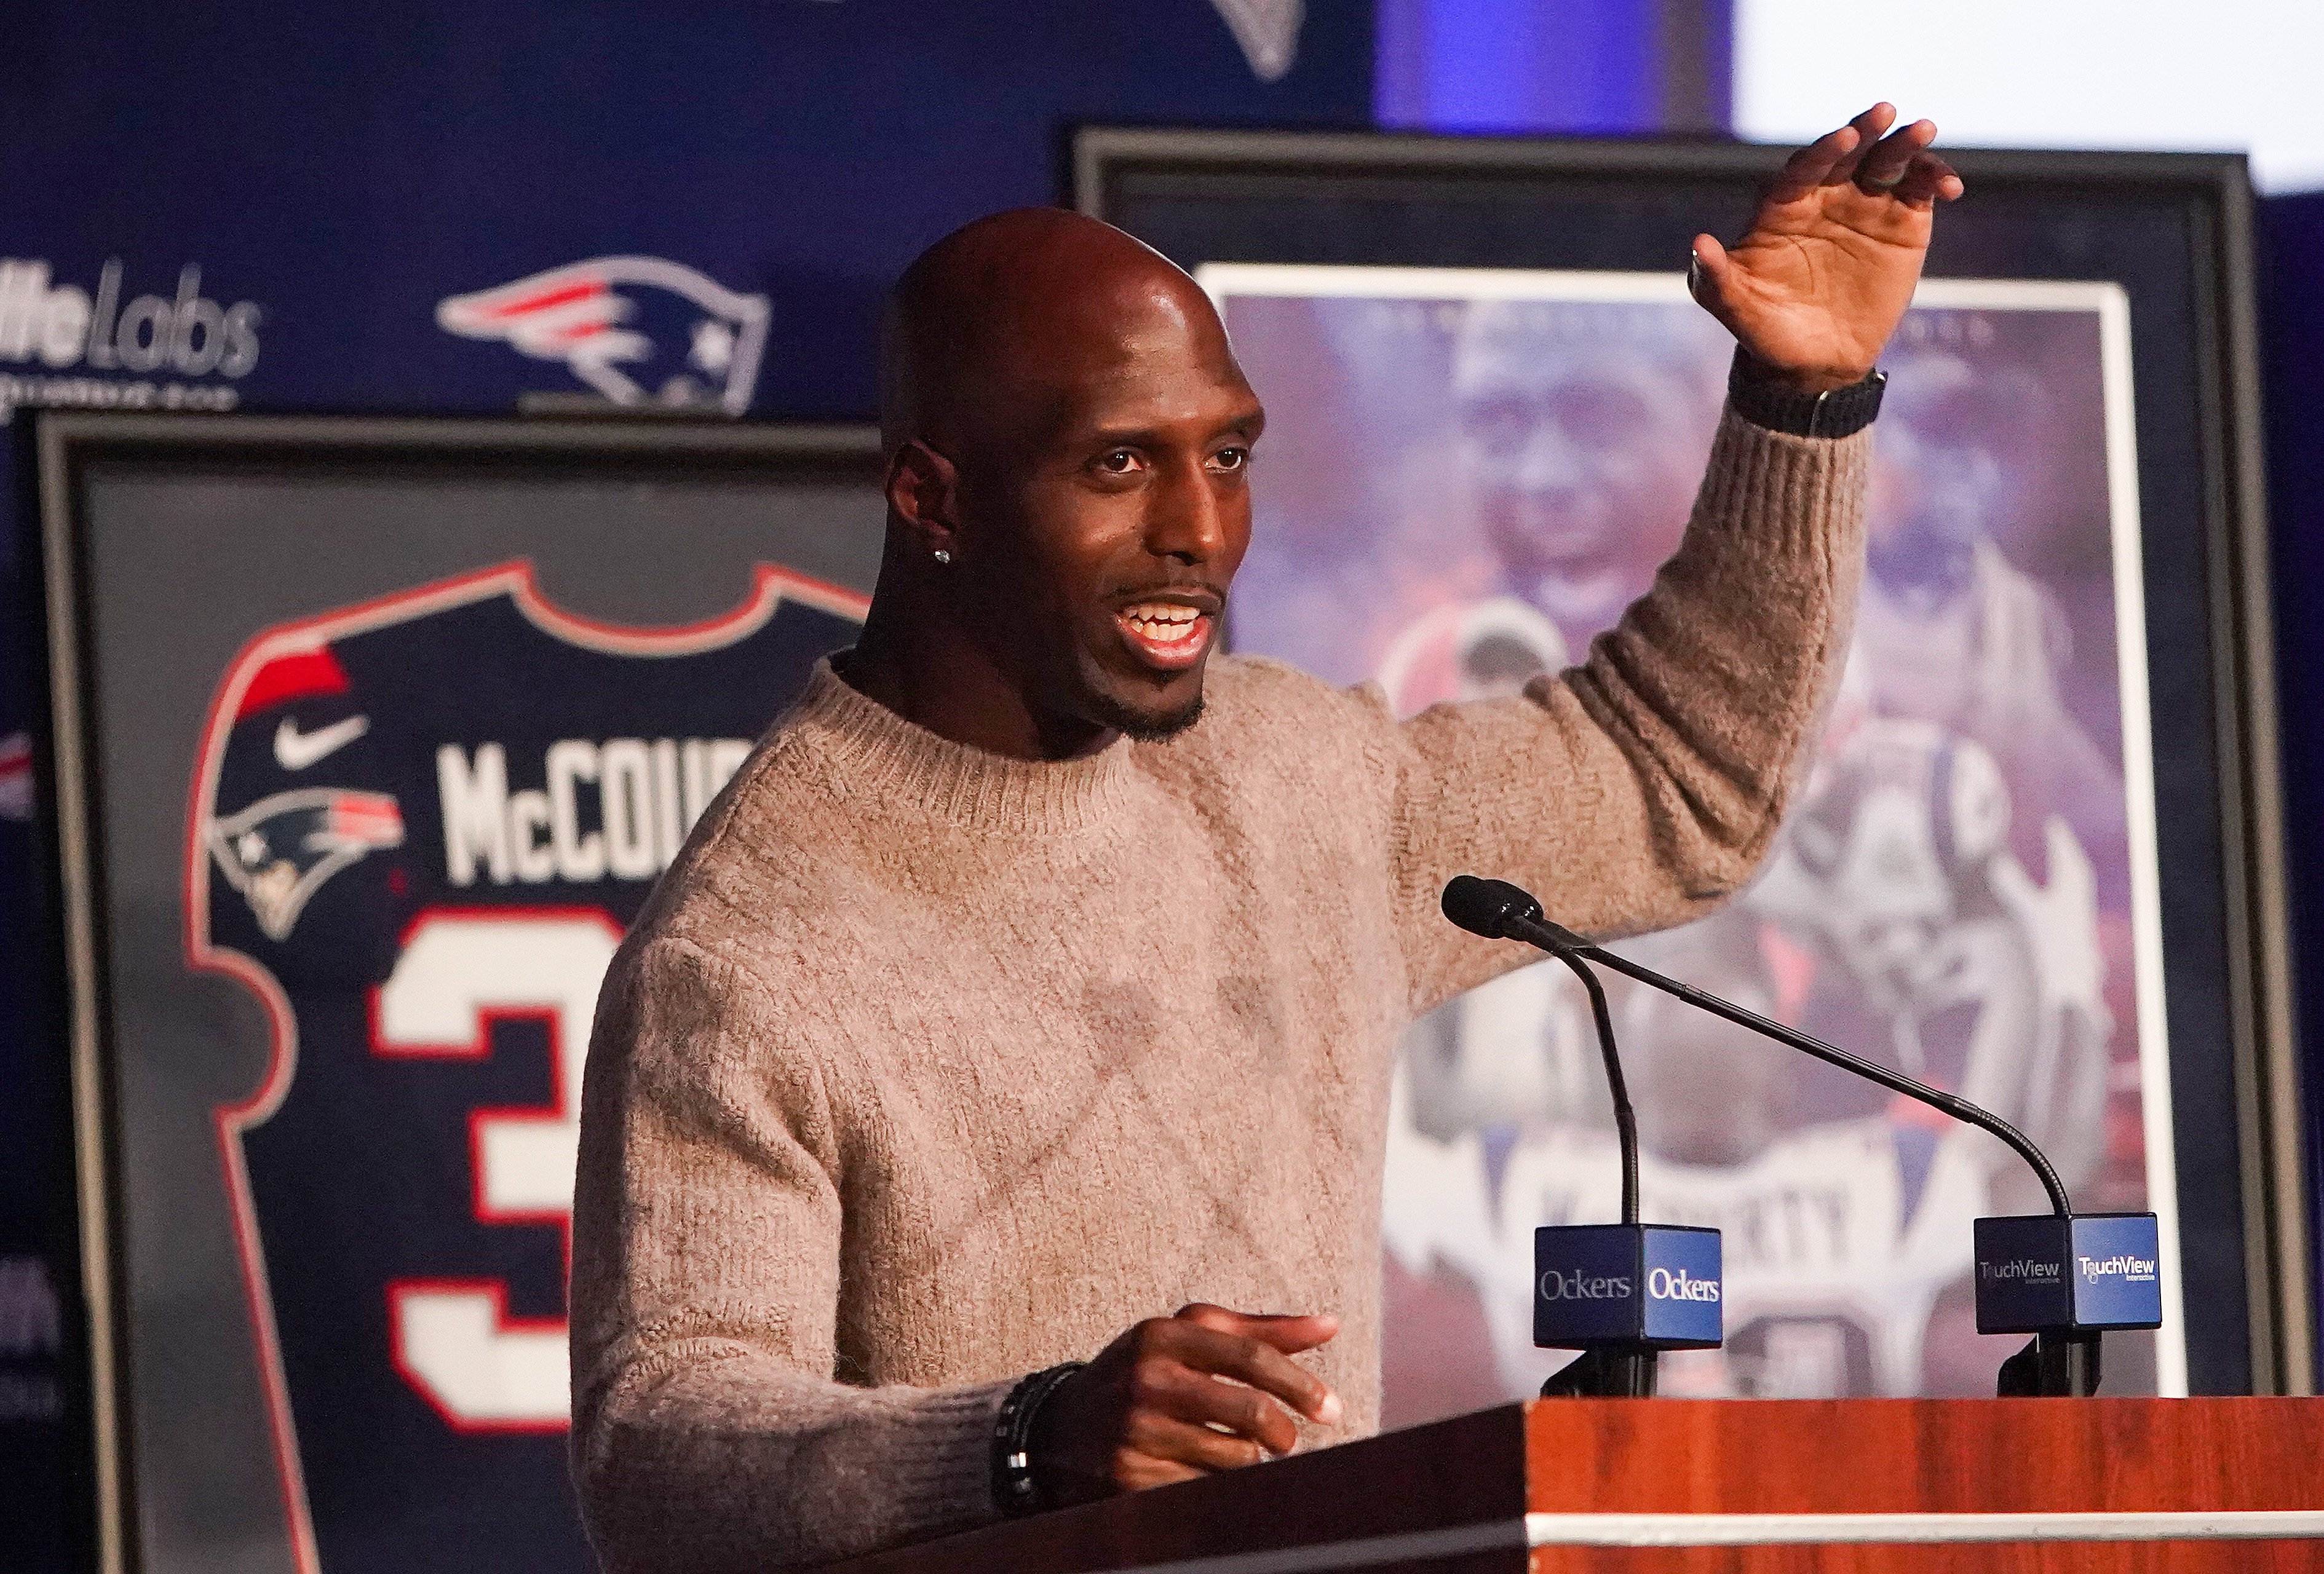 Devin McCourty to appear as a guest analyst on 'NFL Today' over Patriots'  bye week - The Boston Globe